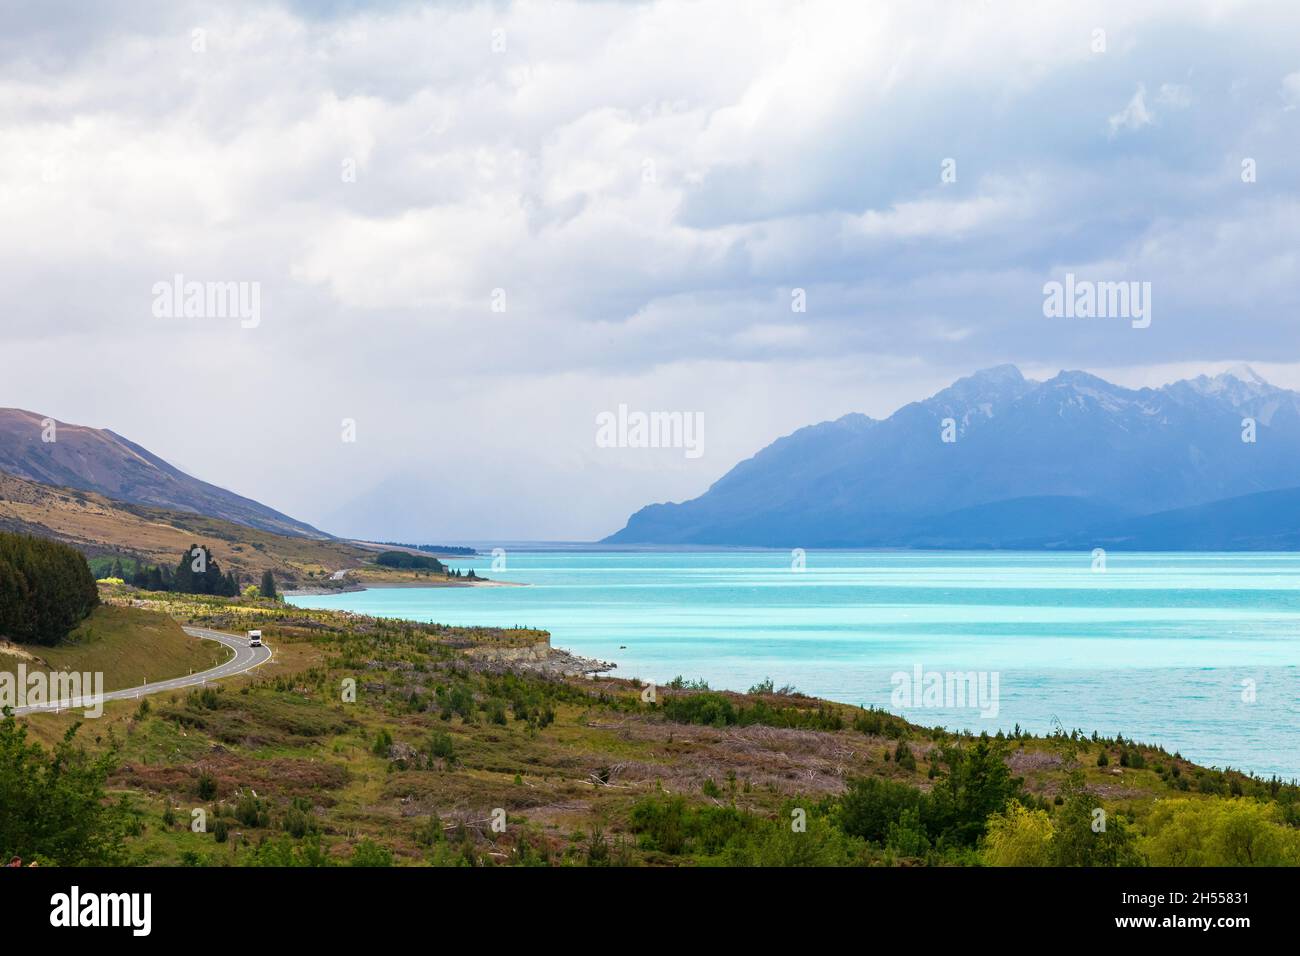 Road to the Southern Alps. Along the shore of the turquoise lake Pukaki. New Zealand Stock Photo